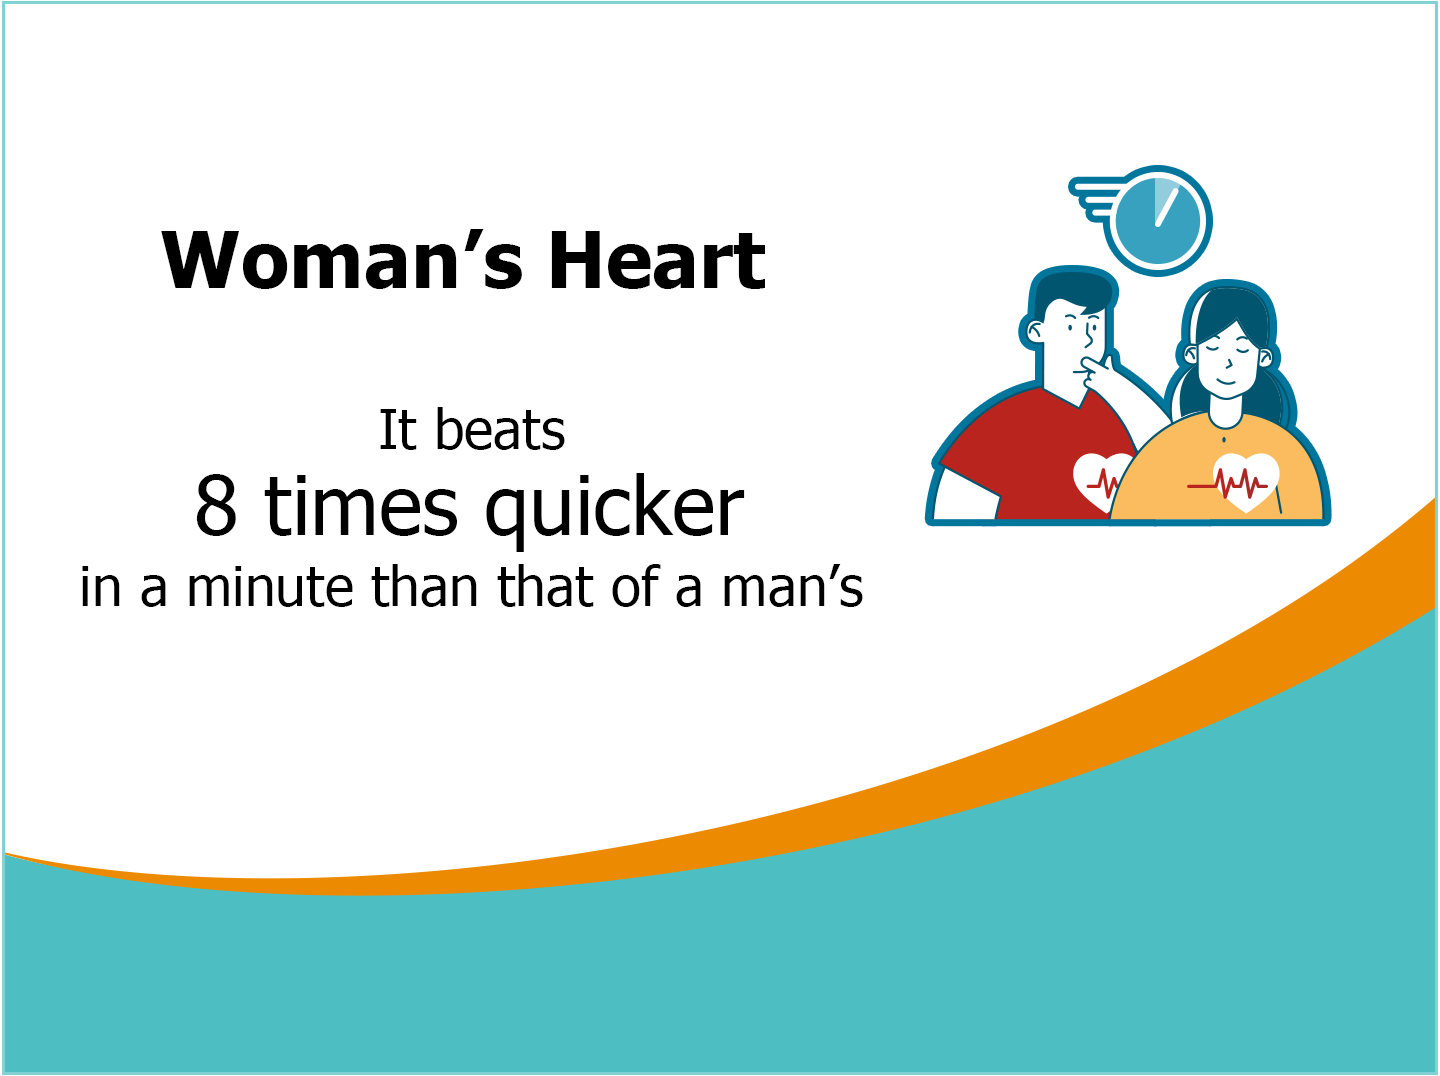 The picture illustrates that a woman's heart beats 8 times quicker than a man.